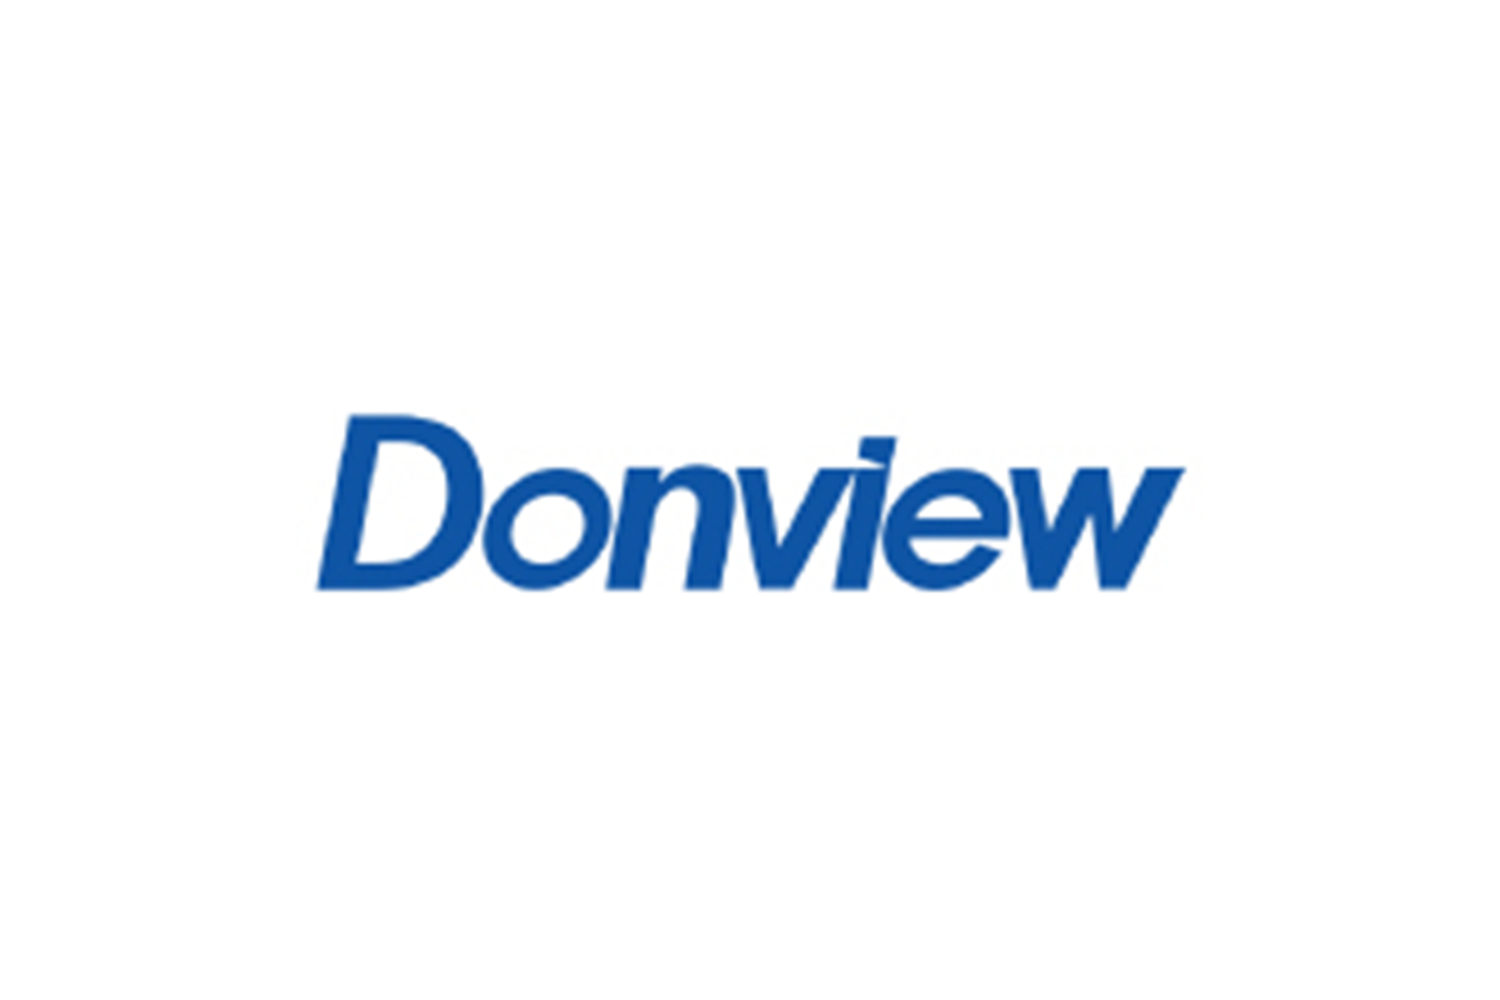 DONVIEW